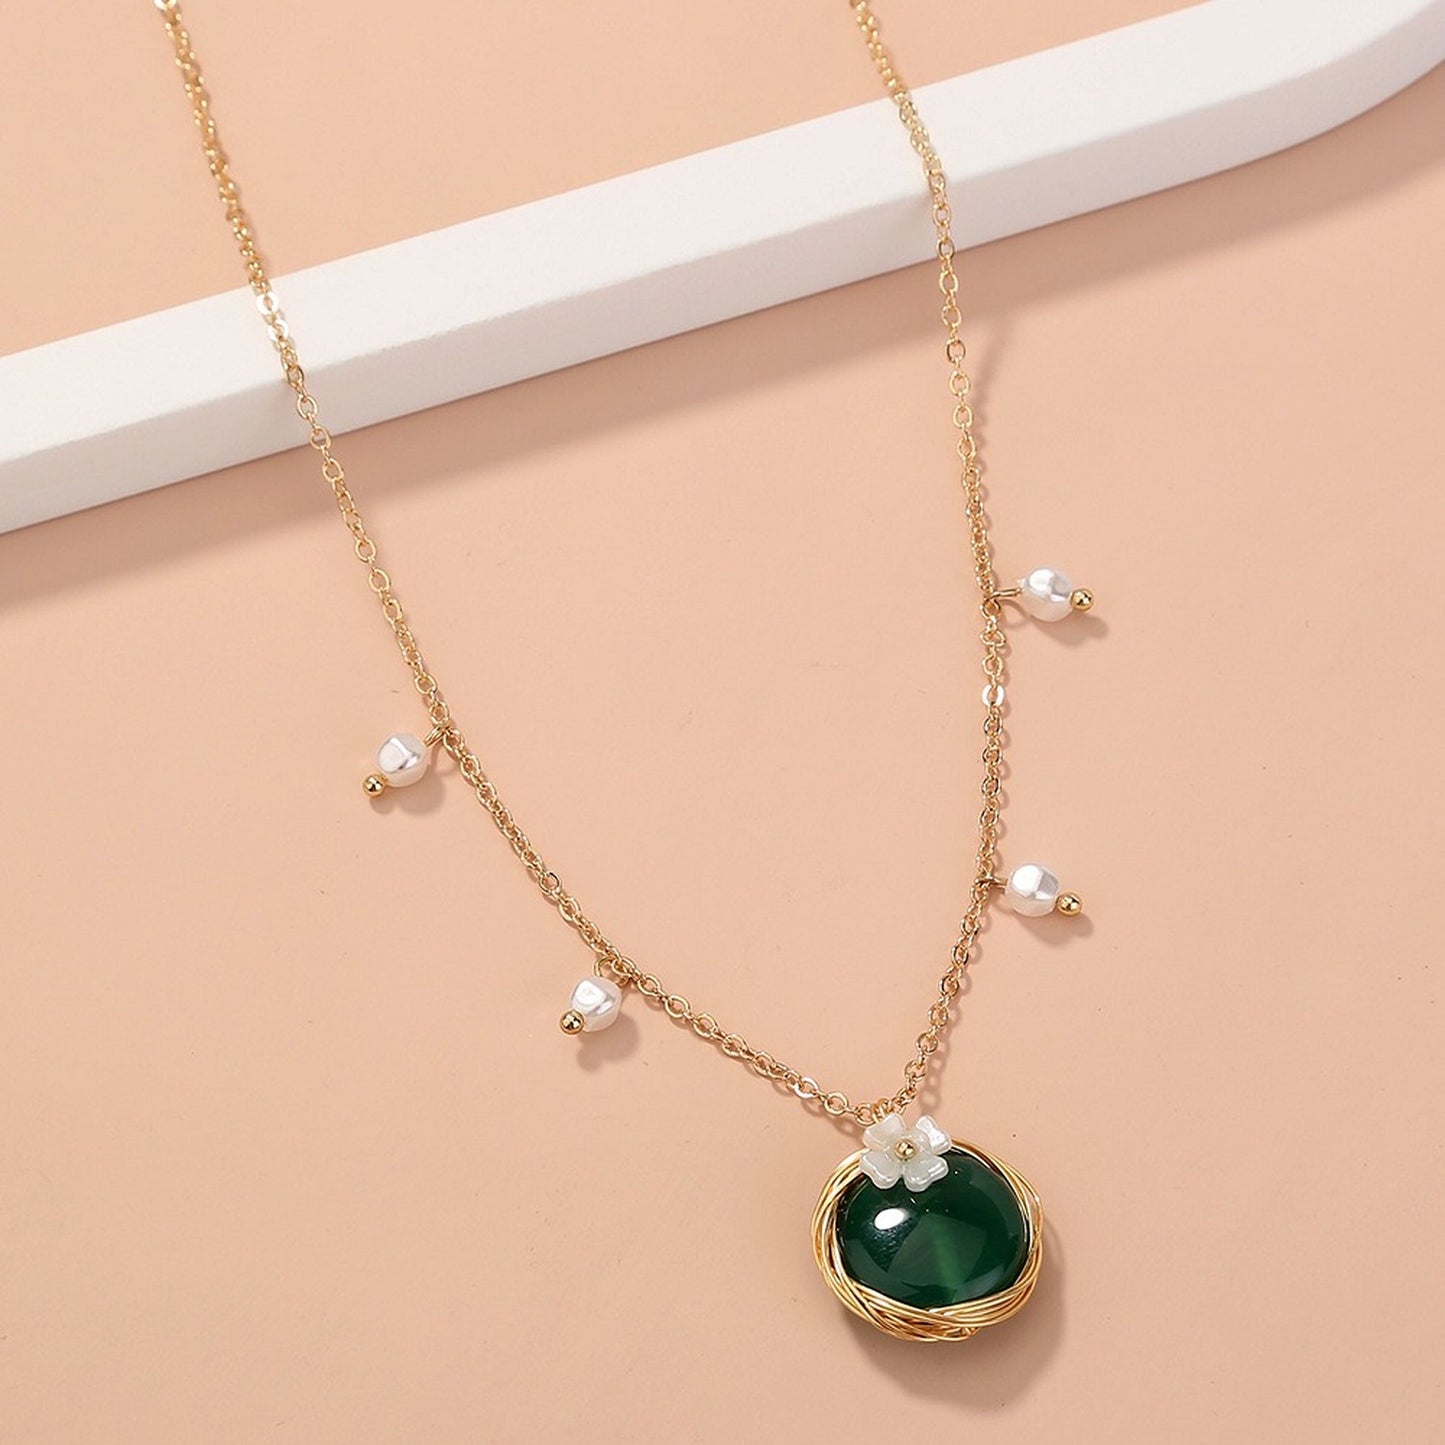 Emerald Green Jade Necklace, Round Pendant Necklace, Floral Pearl Layering Necklace, Agate Necklace, Layered Necklace, Birthday Gift for Her